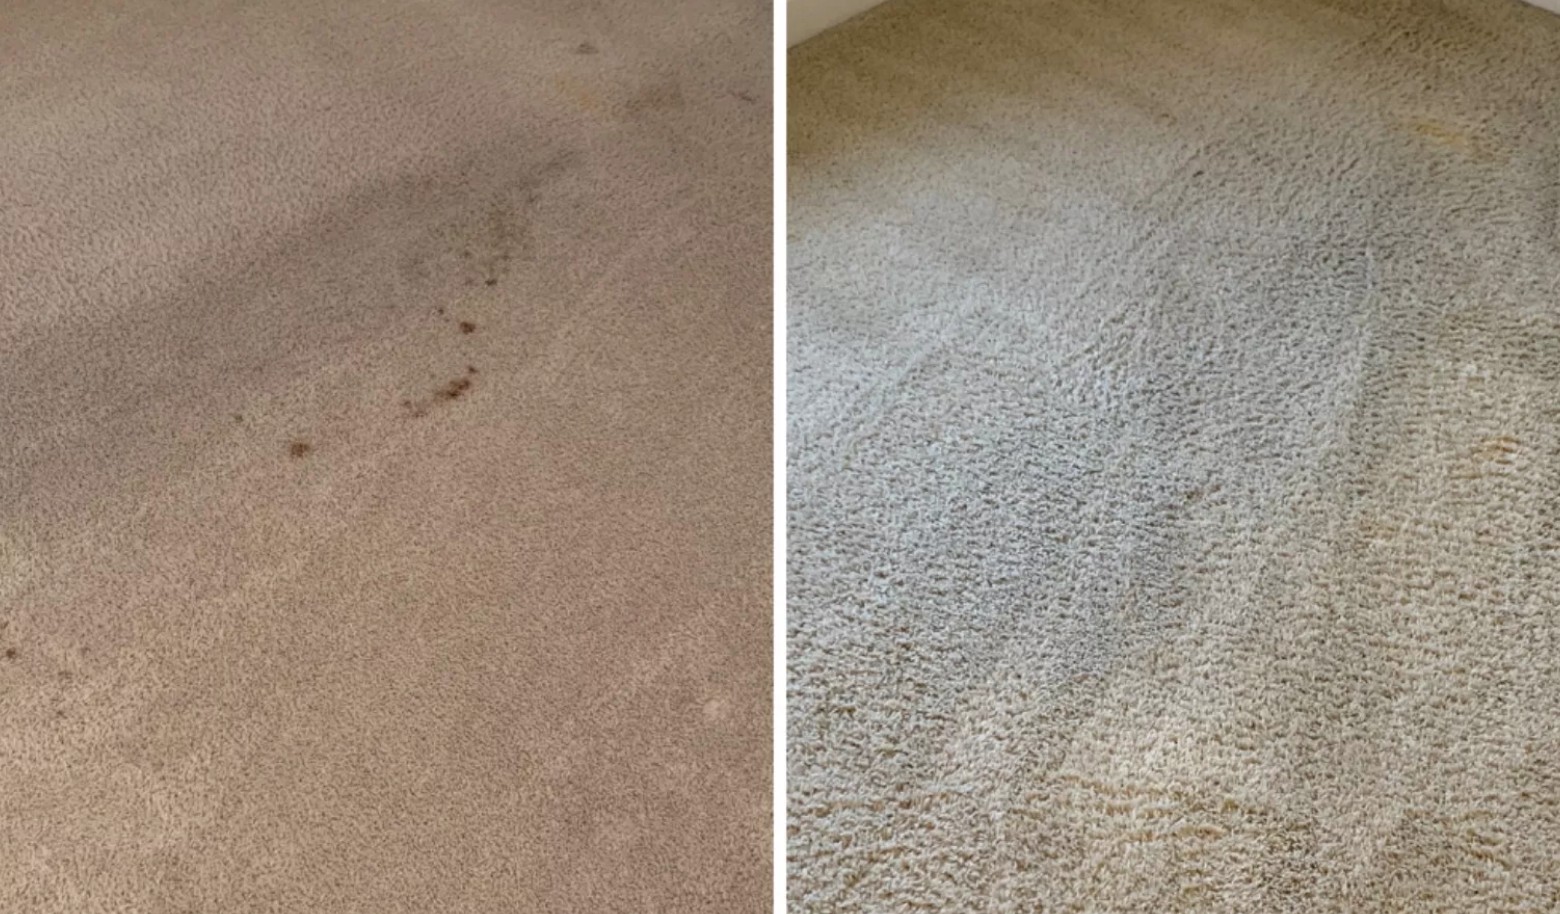 Professional carpet cleaning before & after from testimonial